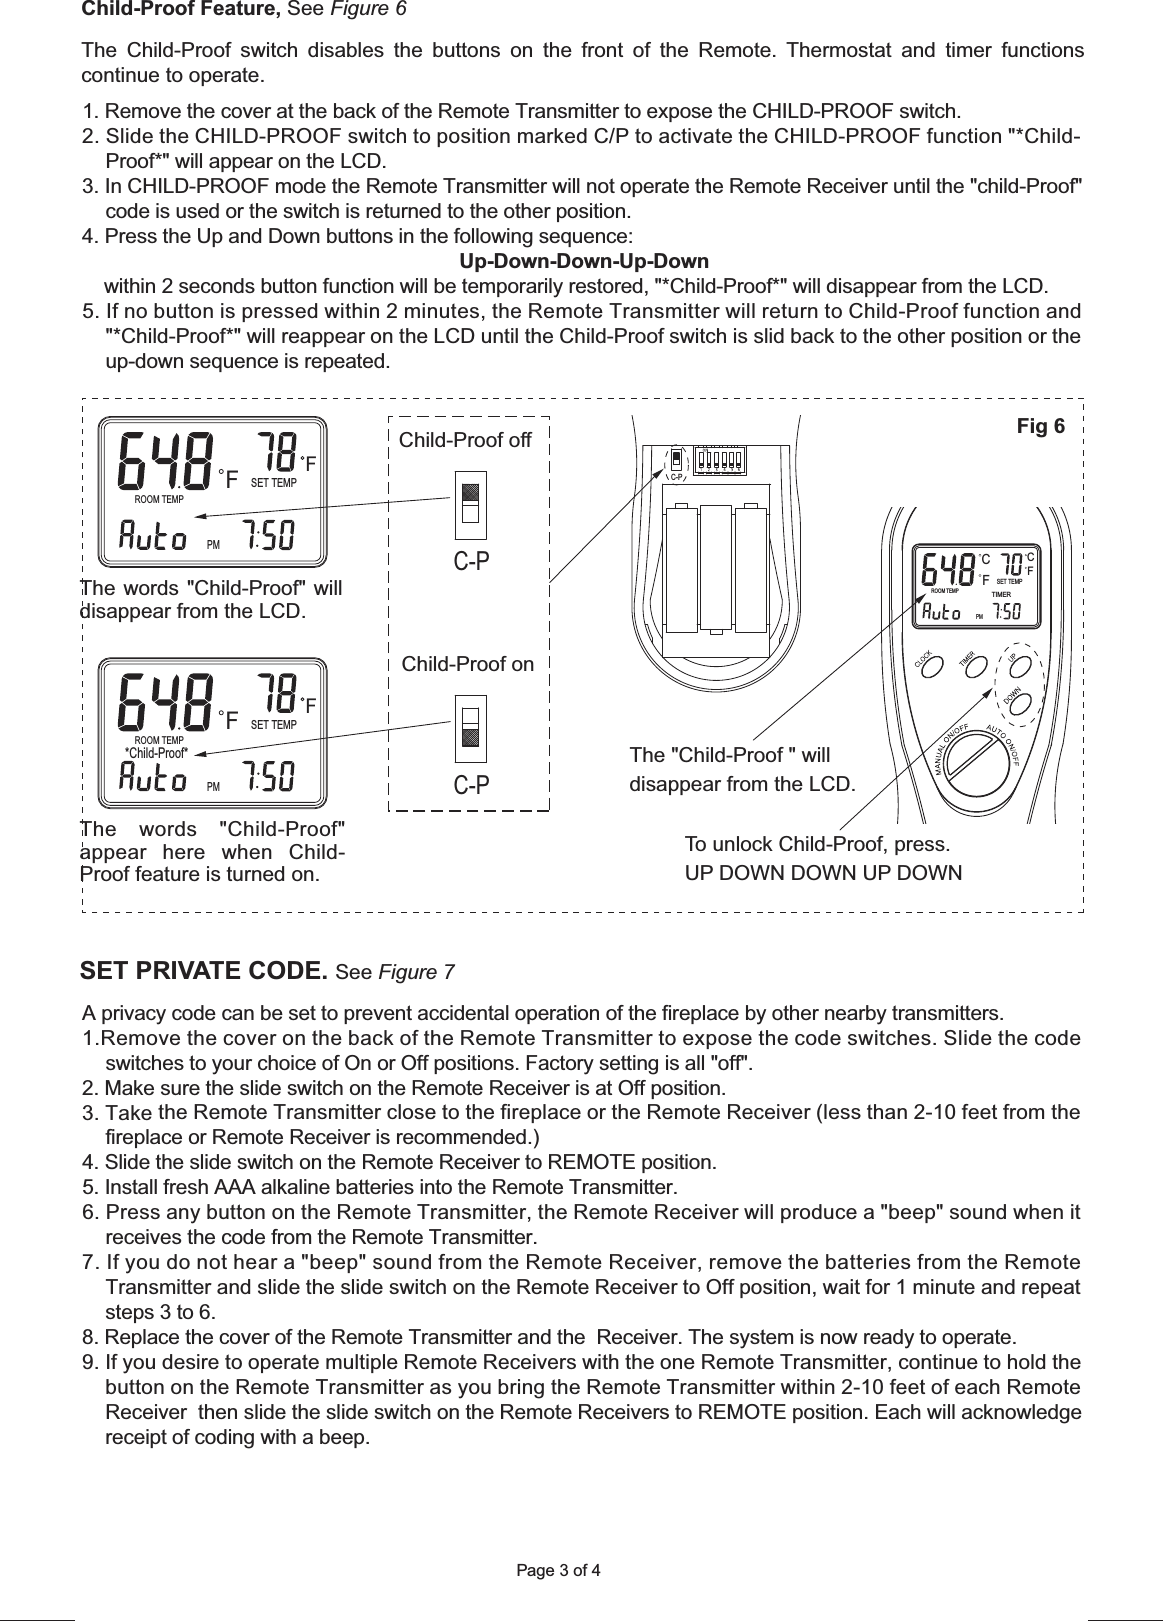 Page 3 of 4PMROOM TEMP*Child-Proof*SET TEMPTIMERCFFCPMROOM TEMP*Child-Proof*SET TEMPTIMERCFFCTo unlock Child-Proof, press.UP DOWN DOWN UP DOWNChild-Proof off  Child-Proof on The Child-Proof switch disables the buttons on the front of the Remote. Thermostat and timer functions continue to operate.Child-Proof Feature, See Figure 6C-PC-PC-PThe words &quot;Child-Proof&quot; appear here when Child-Proof feature is turned on.The words &quot;Child-Proof&quot; will disappear from the LCD.The &quot;Child-Proof &quot; will disappear from the LCD.SET PRIVATE CODE. See Figure 7Fig 6ROOM TEMPSET TEMPTIMERCFFCPM1. Remove the cover at the back of the Remote Transmitter to expose the CHILD-PROOF switch.2. Slide the CHILD-PROOF switch to position marked C/P to activate the CHILD-PROOF function &quot;*Child-Proof*&quot; will appear on the LCD.3. In CHILD-PROOF mode the Remote Transmitter will not operate the Remote Receiver until the &quot;child-Proof&quot; code is used or the switch is returned to the other position.4. Press the Up and Down buttons in the following sequence: Up-Down-Down-Up-Down    within 2 seconds button function will be temporarily restored, &quot;*Child-Proof*&quot; will disappear from the LCD.5. If no button is pressed within 2 minutes, the Remote Transmitter will return to Child-Proof function and       &quot;*Child-Proof*&quot; will reappear on the LCD until the Child-Proof switch is slid back to the other position or the up-down sequence is repeated.A privacy code can be set to prevent accidental operation of the fireplace by other nearby transmitters. 1.Remove the cover on the back of the Remote Transmitter to expose the code switches. Slide the code     switches to your choice of On or Off positions. Factory setting is all &quot;off&quot;.2. Make sure the slide switch on the Remote Receiver is at Off position.3. Take the Remote Transmitter close to the fireplace or the Remote Receiver (less than 2-10 feet from the fireplace or Remote Receiver is recommended.)4. Slide the slide switch on the Remote Receiver to REMOTE position.5. Install fresh AAA alkaline batteries into the Remote Transmitter. 6. Press any button on the Remote Transmitter, the Remote Receiver will produce a &quot;beep&quot; sound when it receives the code from the Remote Transmitter. 7. If you do not hear a &quot;beep&quot; sound from the Remote Receiver, remove the batteries from the Remote      Transmitter and slide the slide switch on the Remote Receiver to Off position, wait for 1 minute and repeat steps 3 to 6.8. Replace the cover of the Remote Transmitter and the  Receiver. The system is now ready to operate.9. If you desire to operate multiple Remote Receivers with the one Remote Transmitter, continue to hold the button on the Remote Transmitter as you bring the Remote Transmitter within 2-10 feet of each Remote Receiver  then slide the slide switch on the Remote Receivers to REMOTE position. Each will acknowledge receipt of coding with a beep.